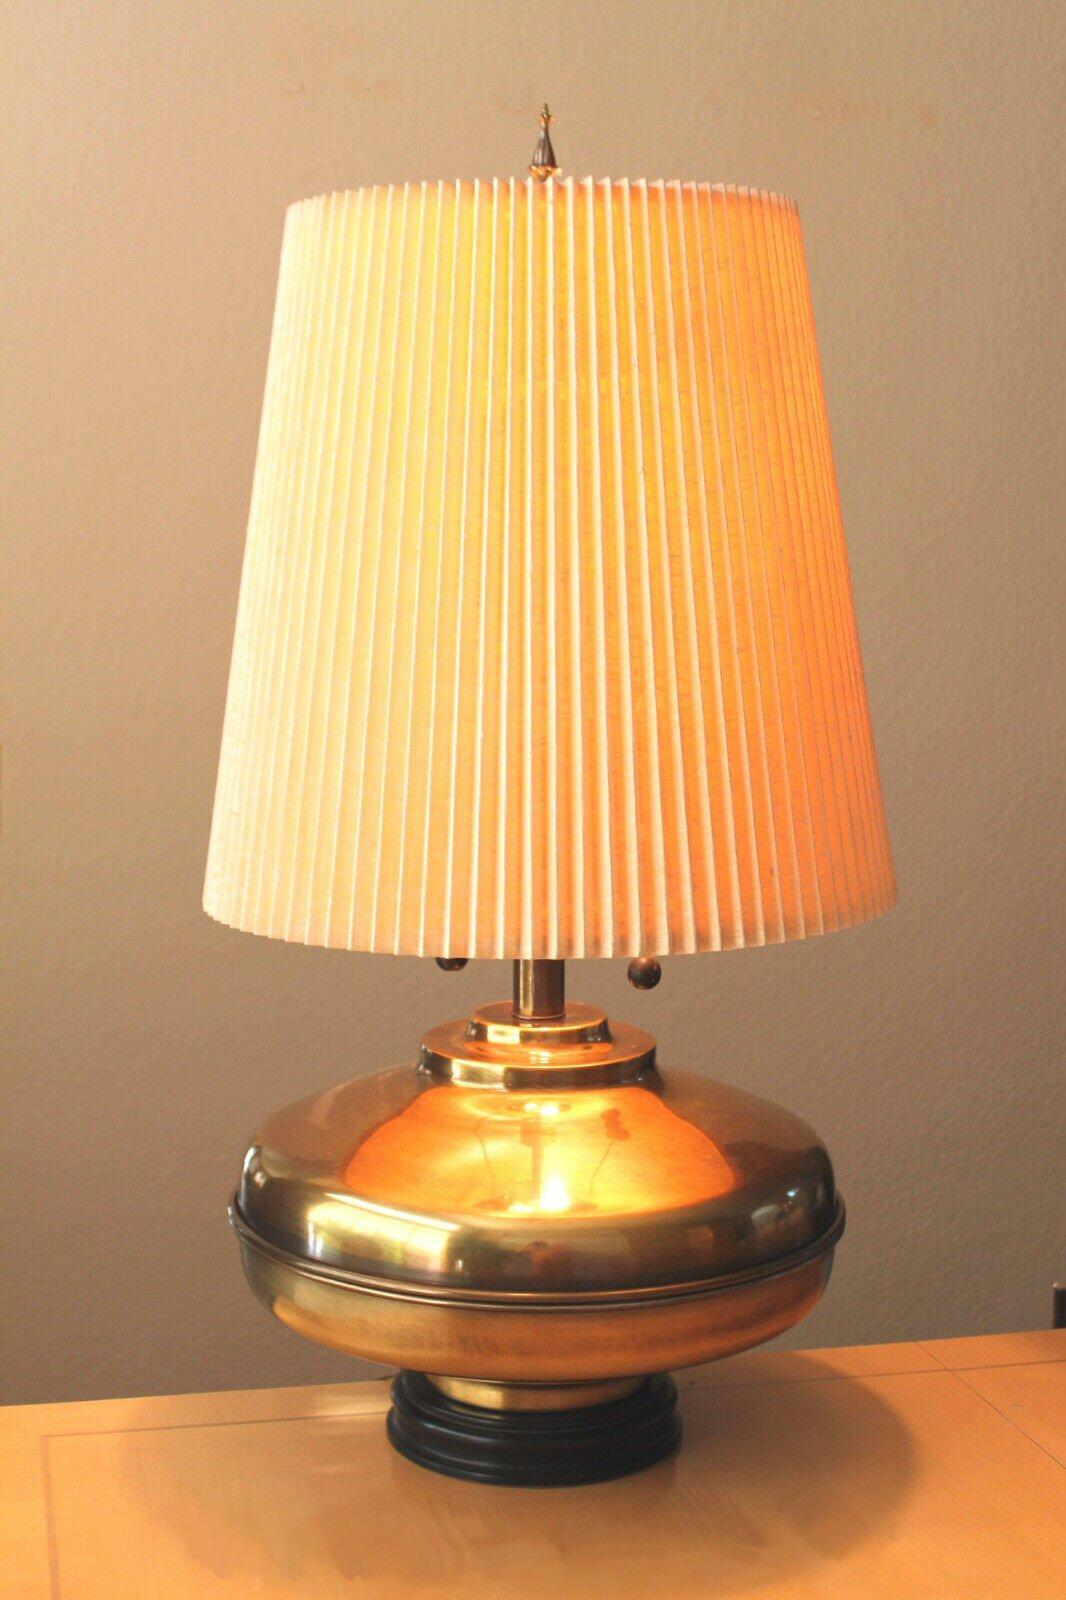 20th Century Marvelous MARBRO Mid Century Polished Brass Table Lamp! Huge Showpiece Lighting For Sale